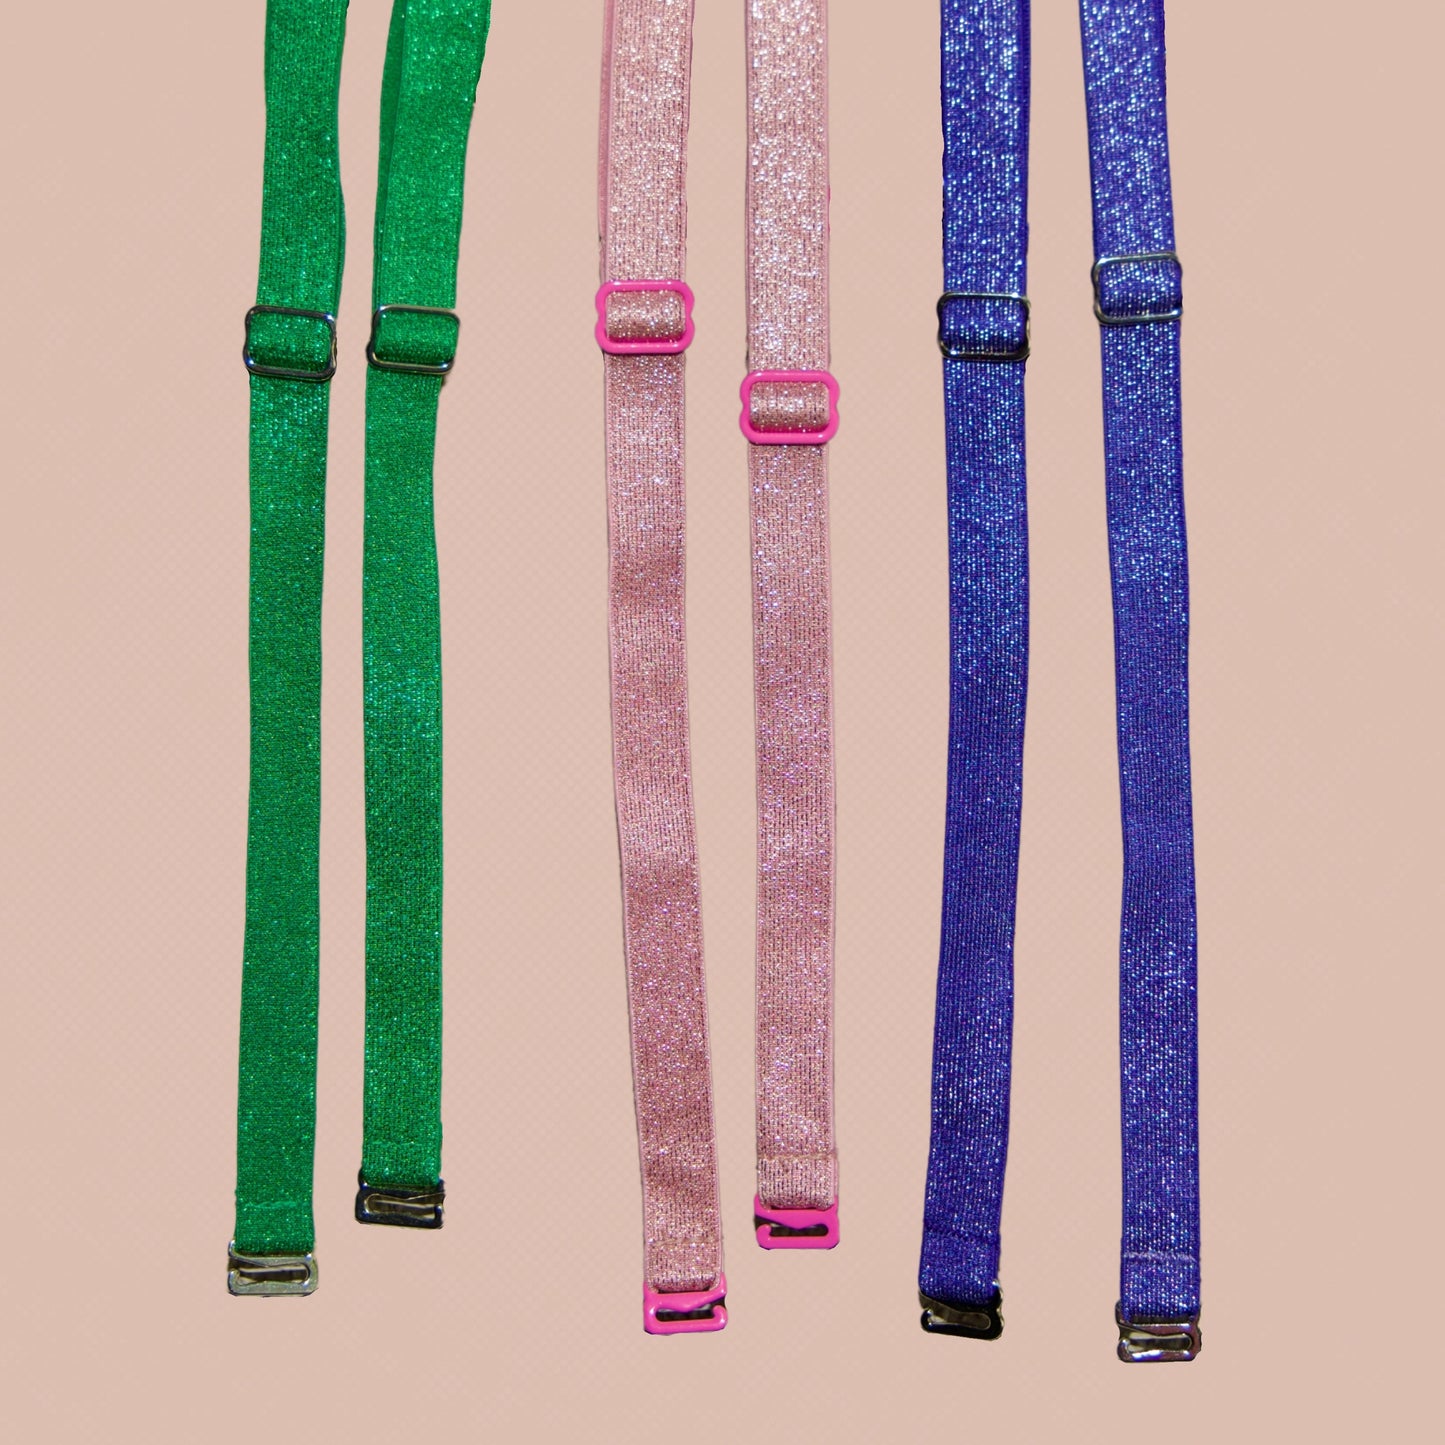 3 sets of Metallic interchangeable her-rah Straps, from left to right: Emerald Green, Princess pink, Royal Blue.